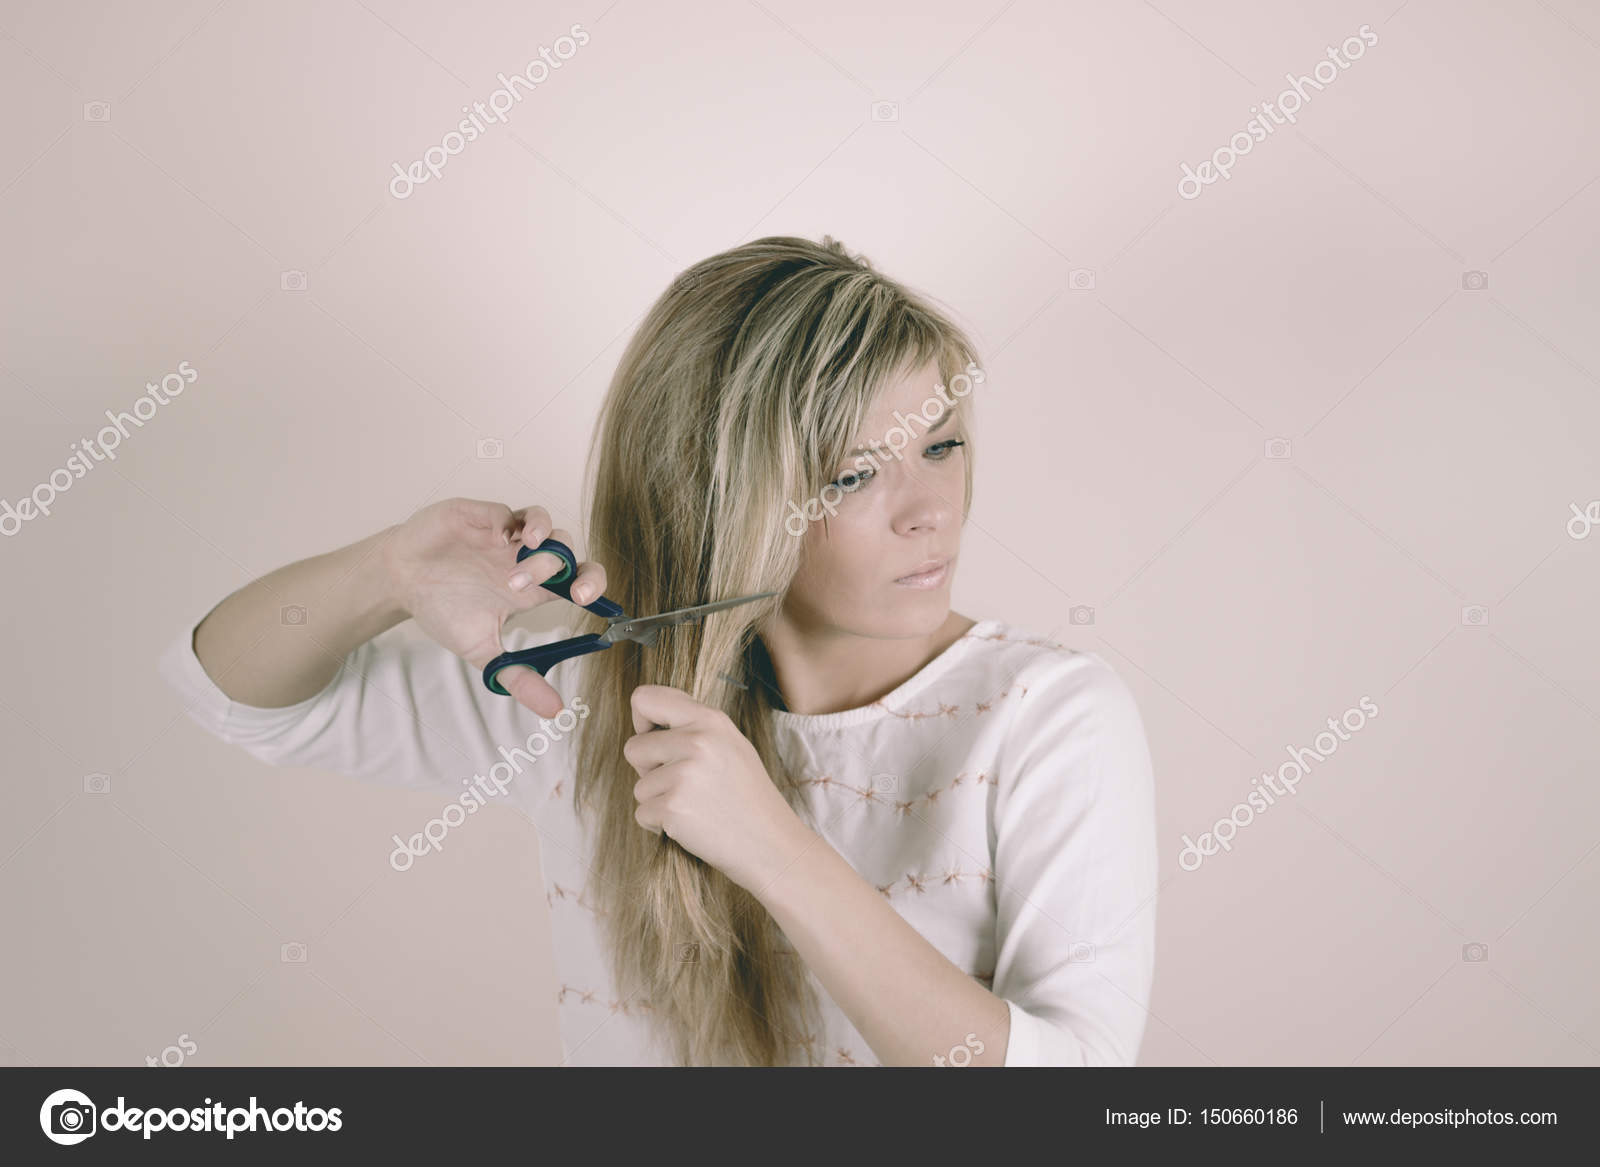 Angry Blonde Woman Cuts Her Hair With Scissors Stock Photo